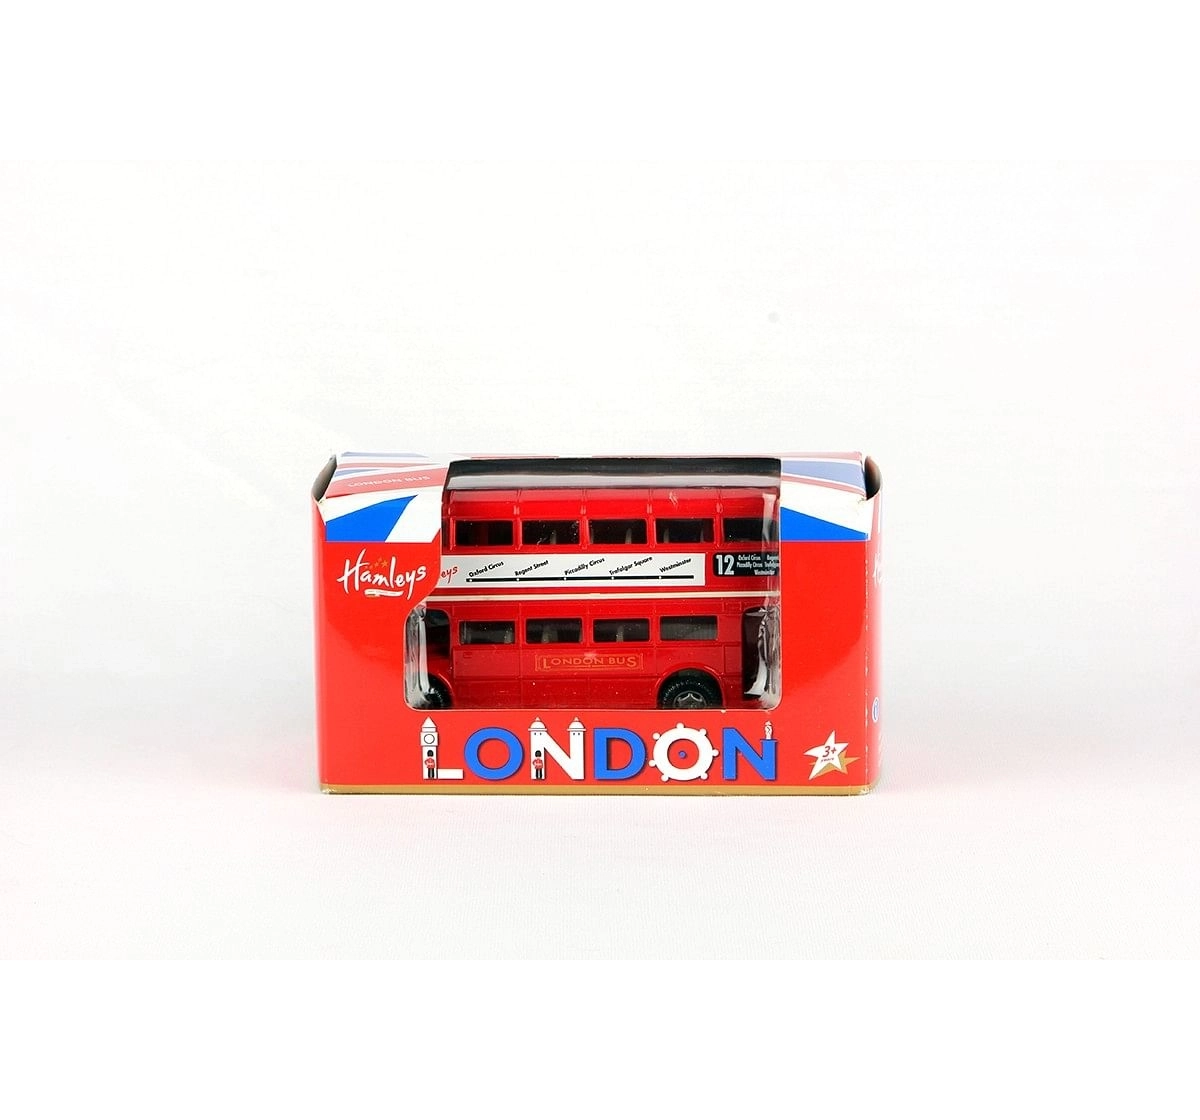  Hamleys London Double Decker Bus (Red) Vehicles for Kids age 3Y+ (Red)